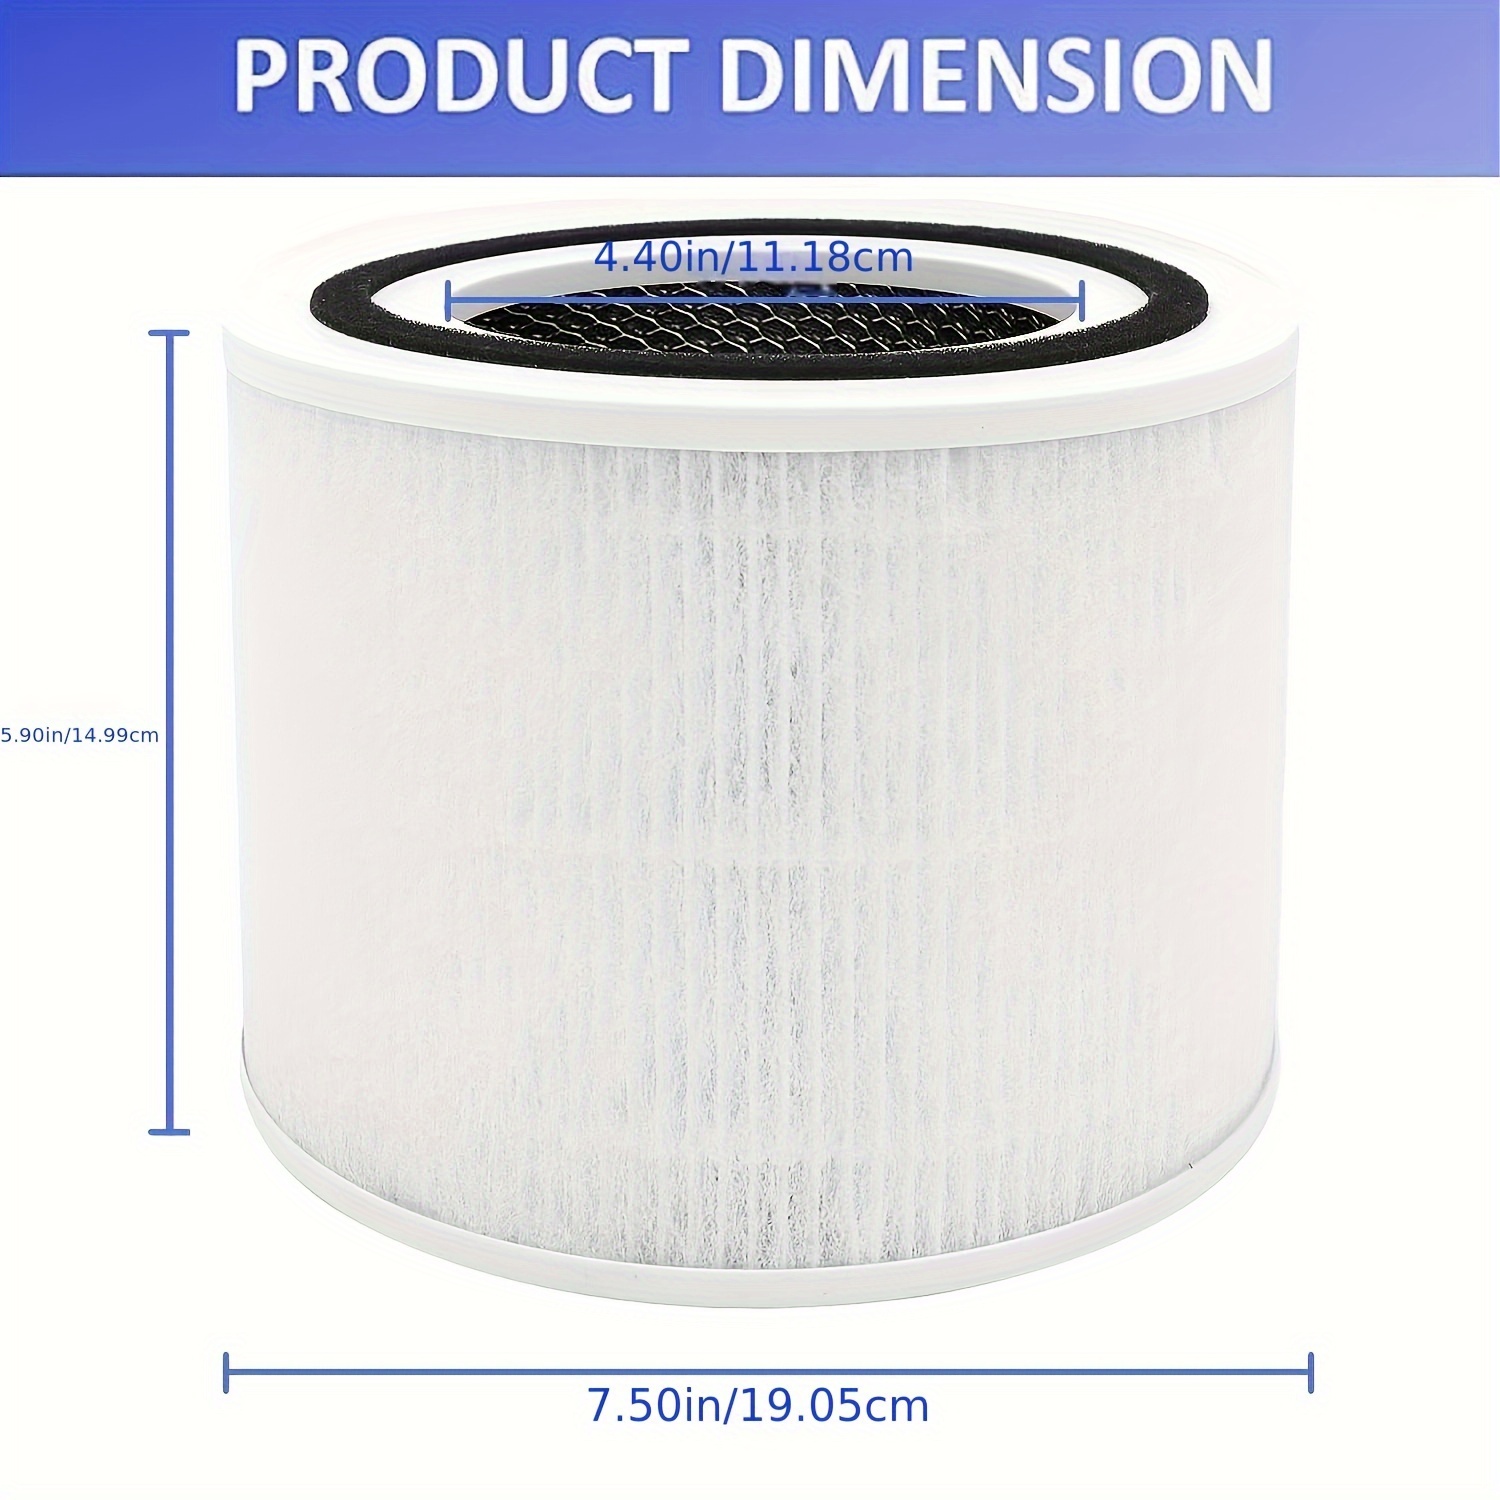 Levoit LV-H133 Tower True HEPA Replacement Filter